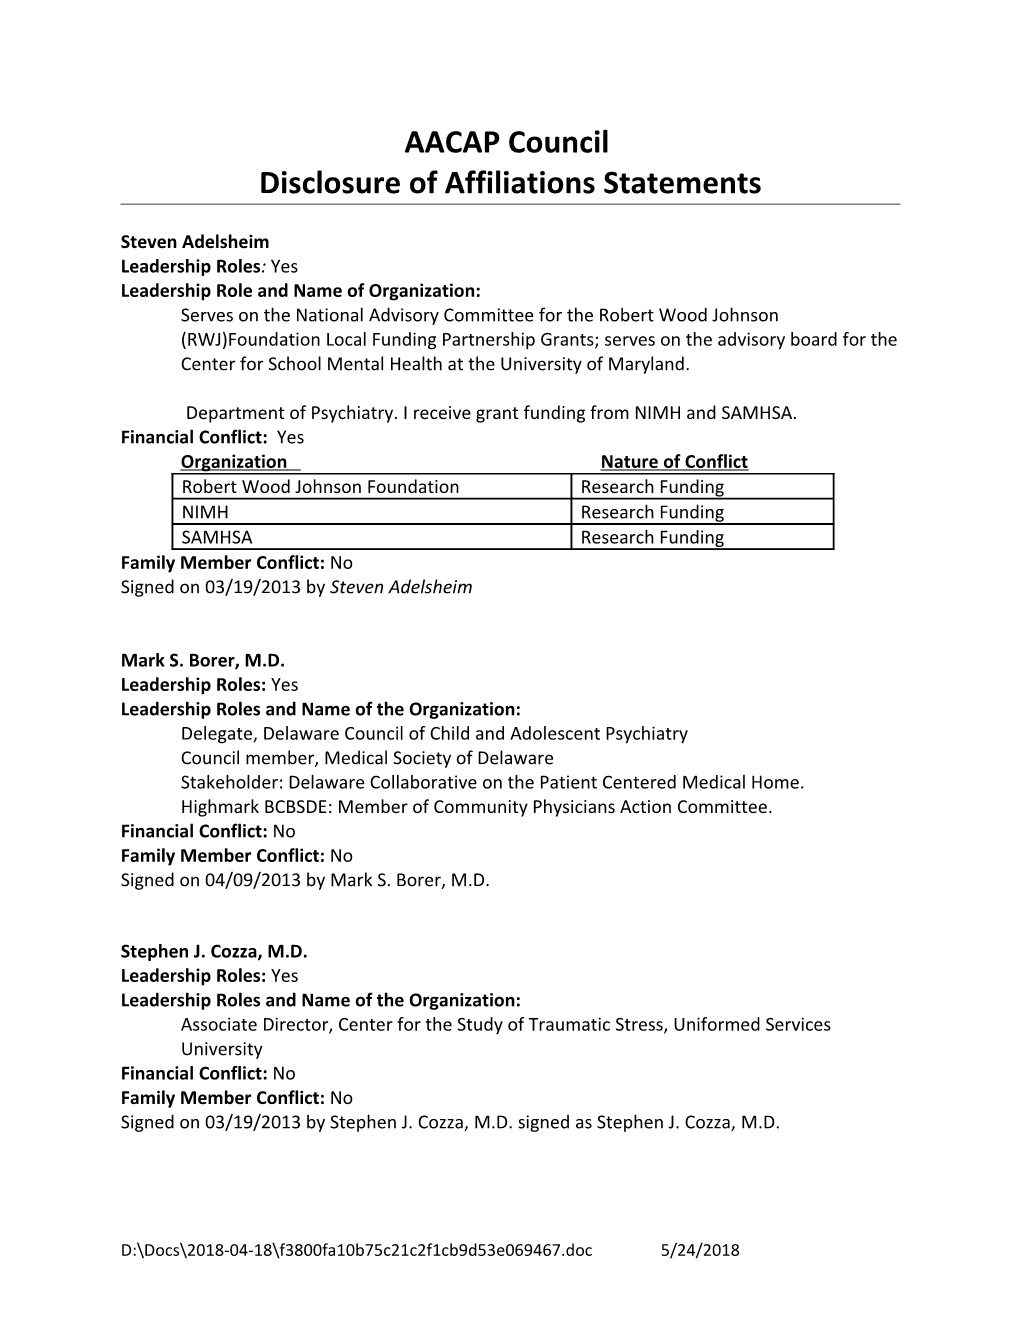 Disclosure of Affiliations Statements